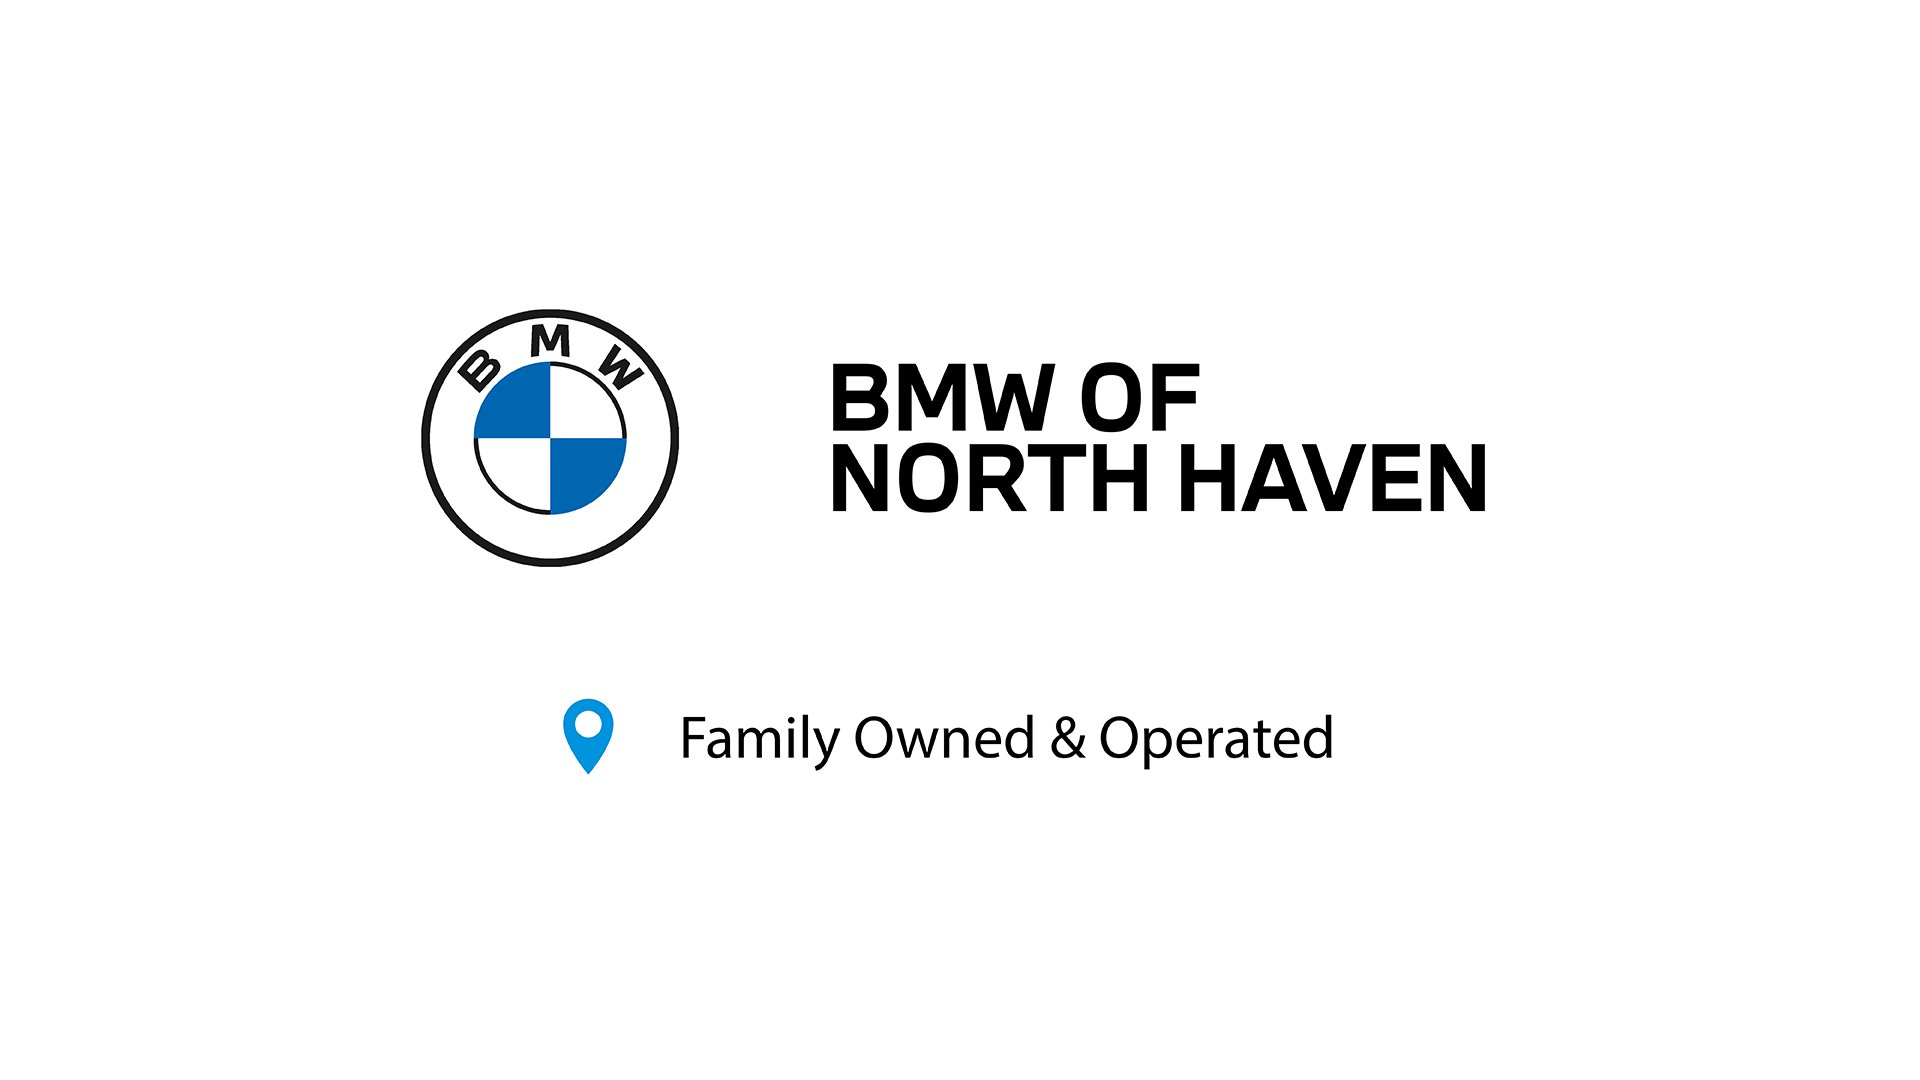 BMW OF NORTH HAVEN